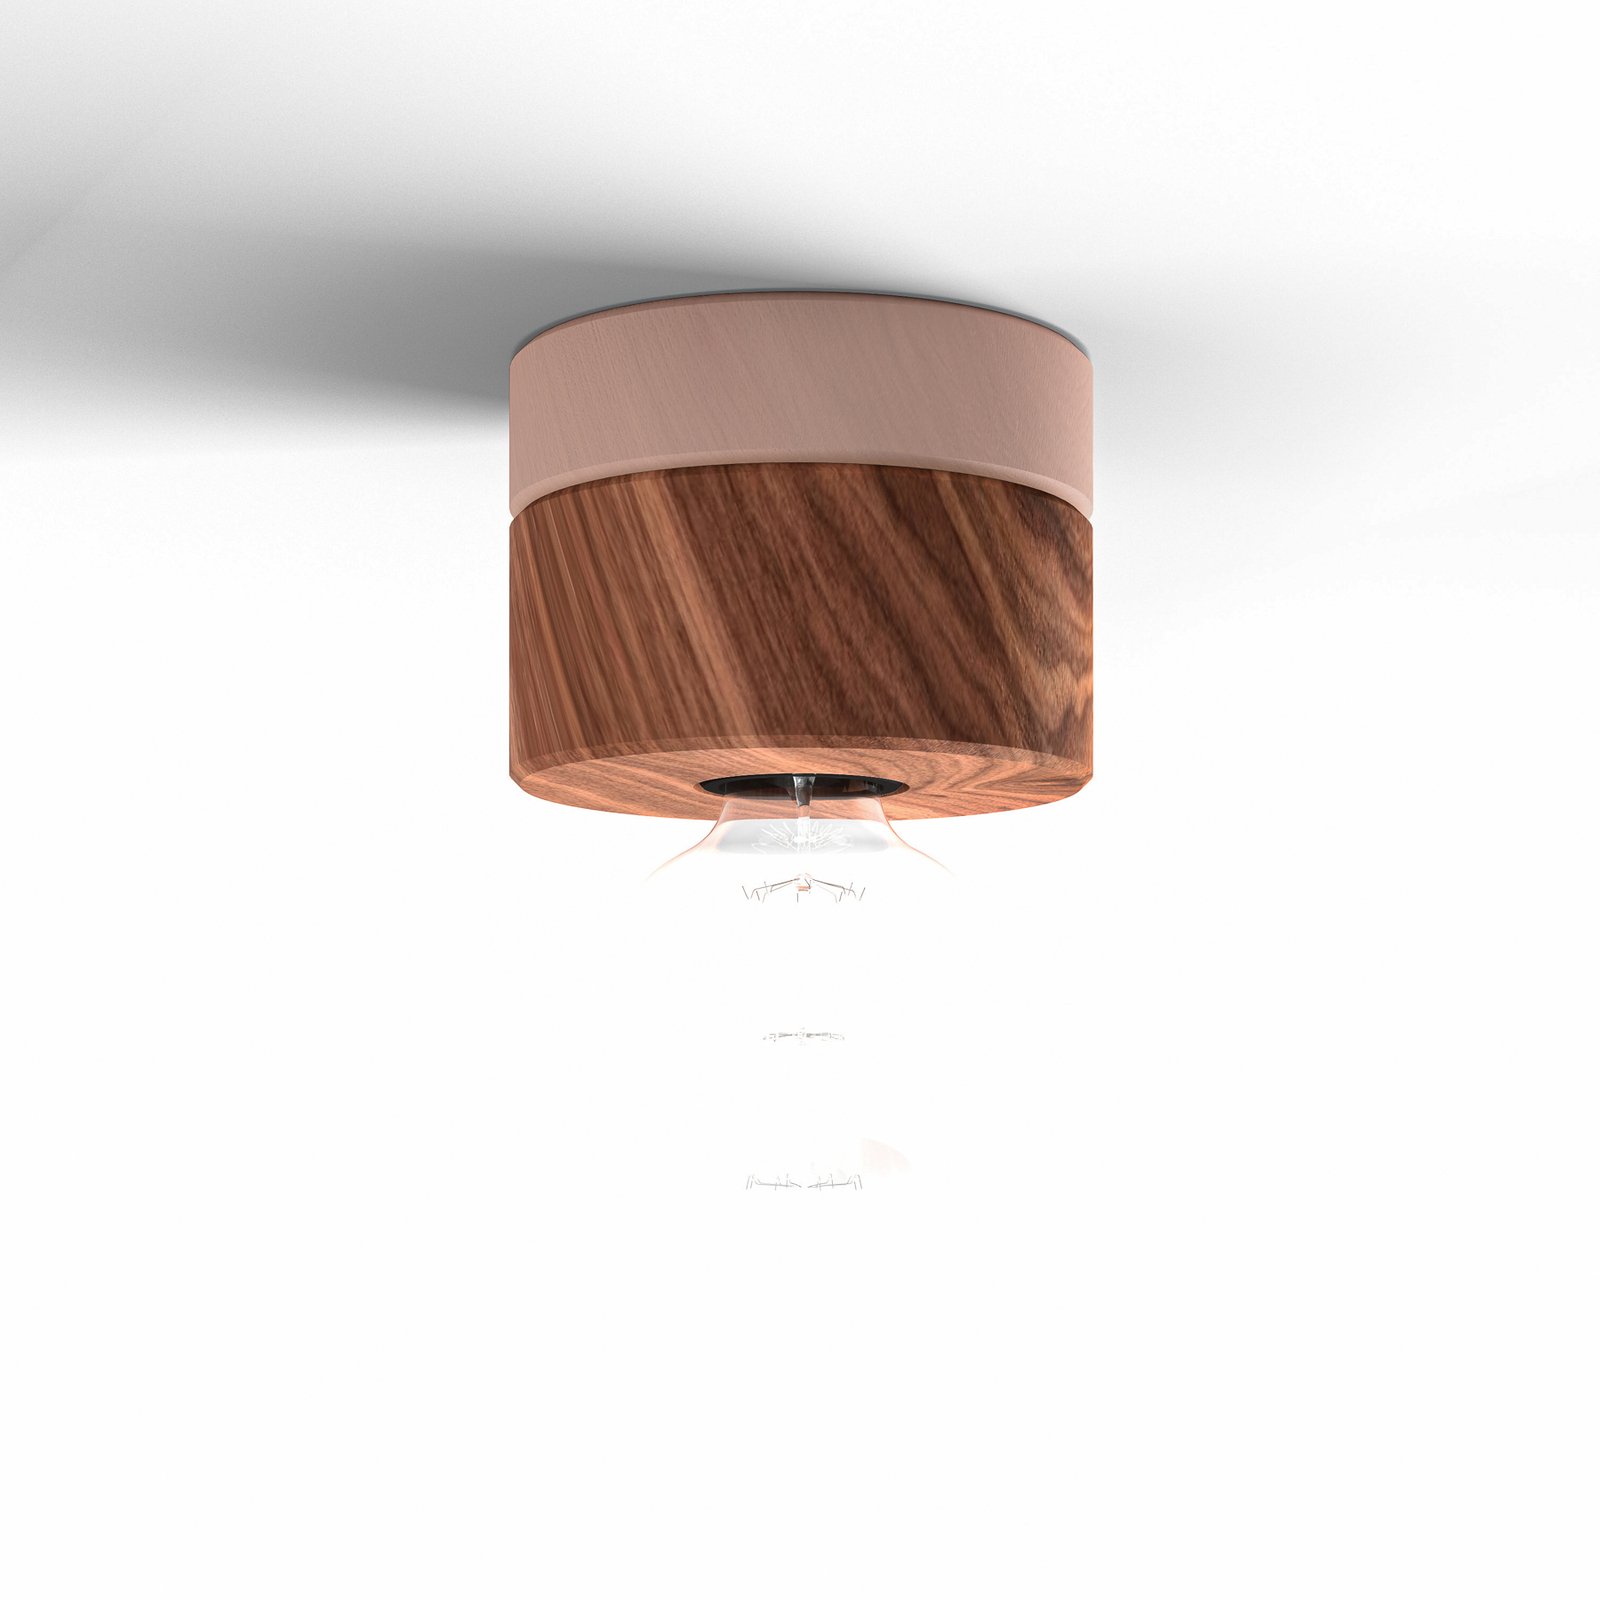 ALMUT 0239 ceiling lamp, sustainable, walnut/pink